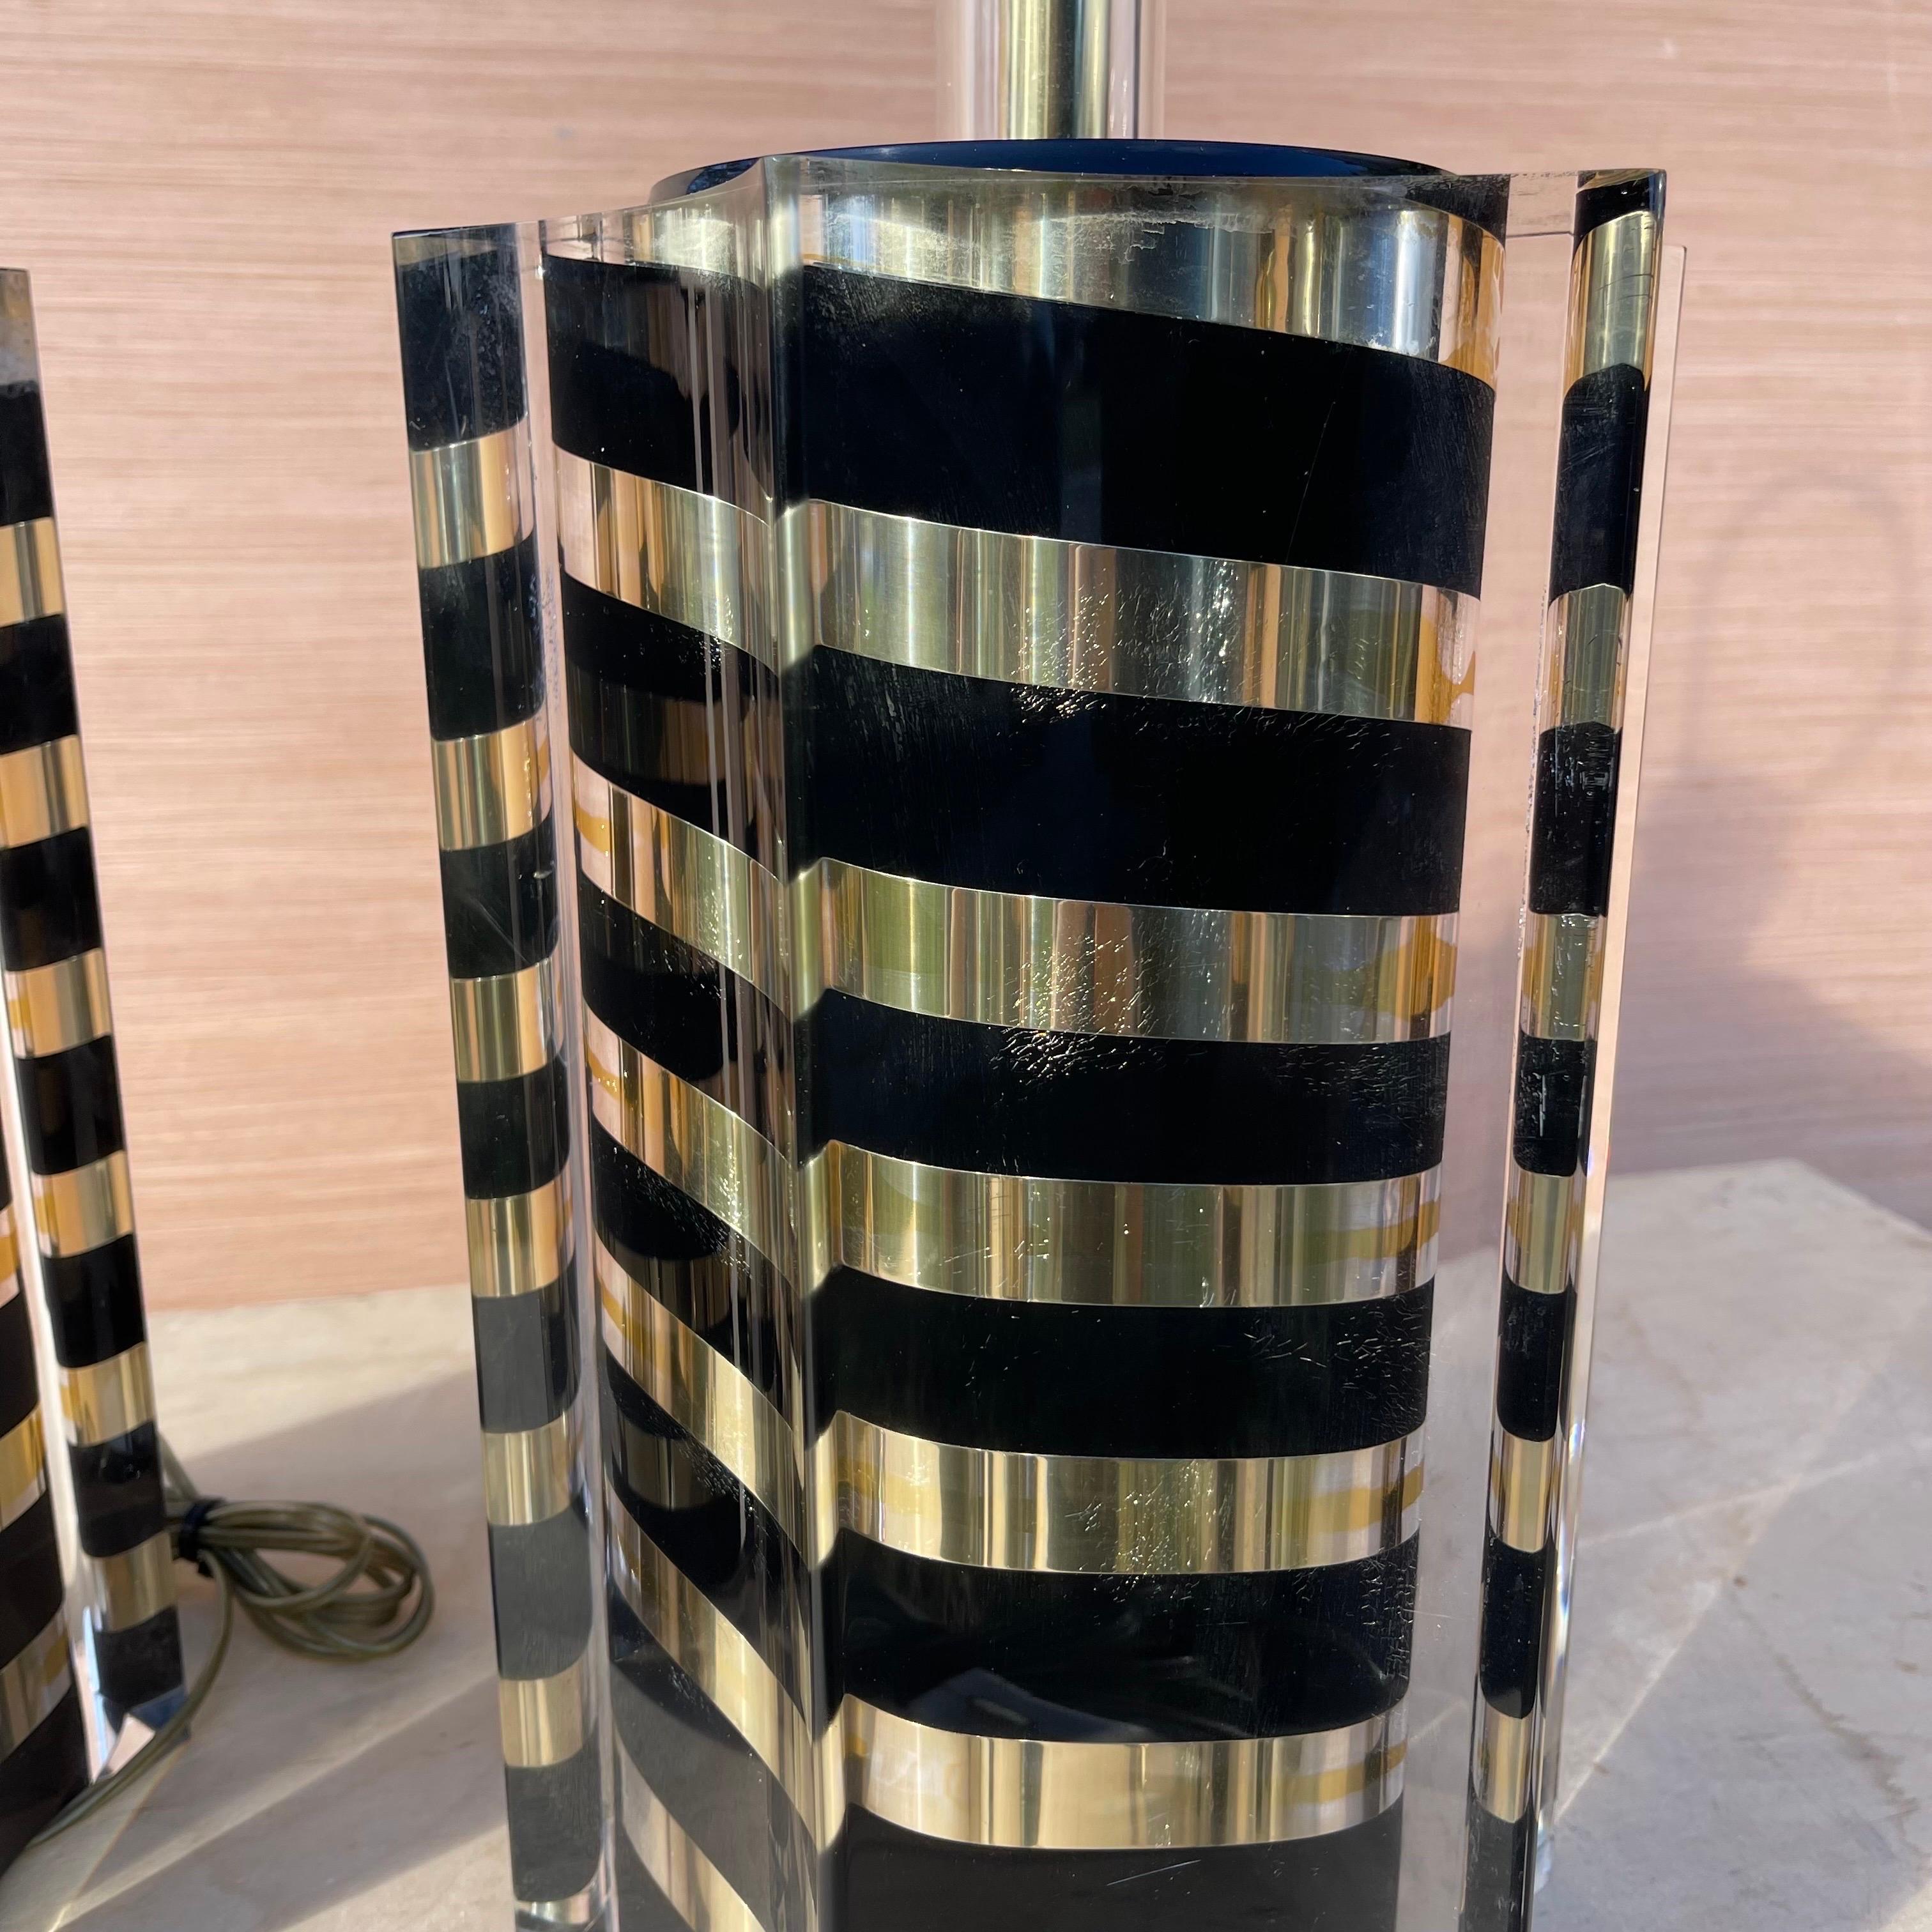 Late 20th Century Postmodern Black & Gold Striped Lucite Lamps, Smart Italia Roma, 1980s - a Pair For Sale